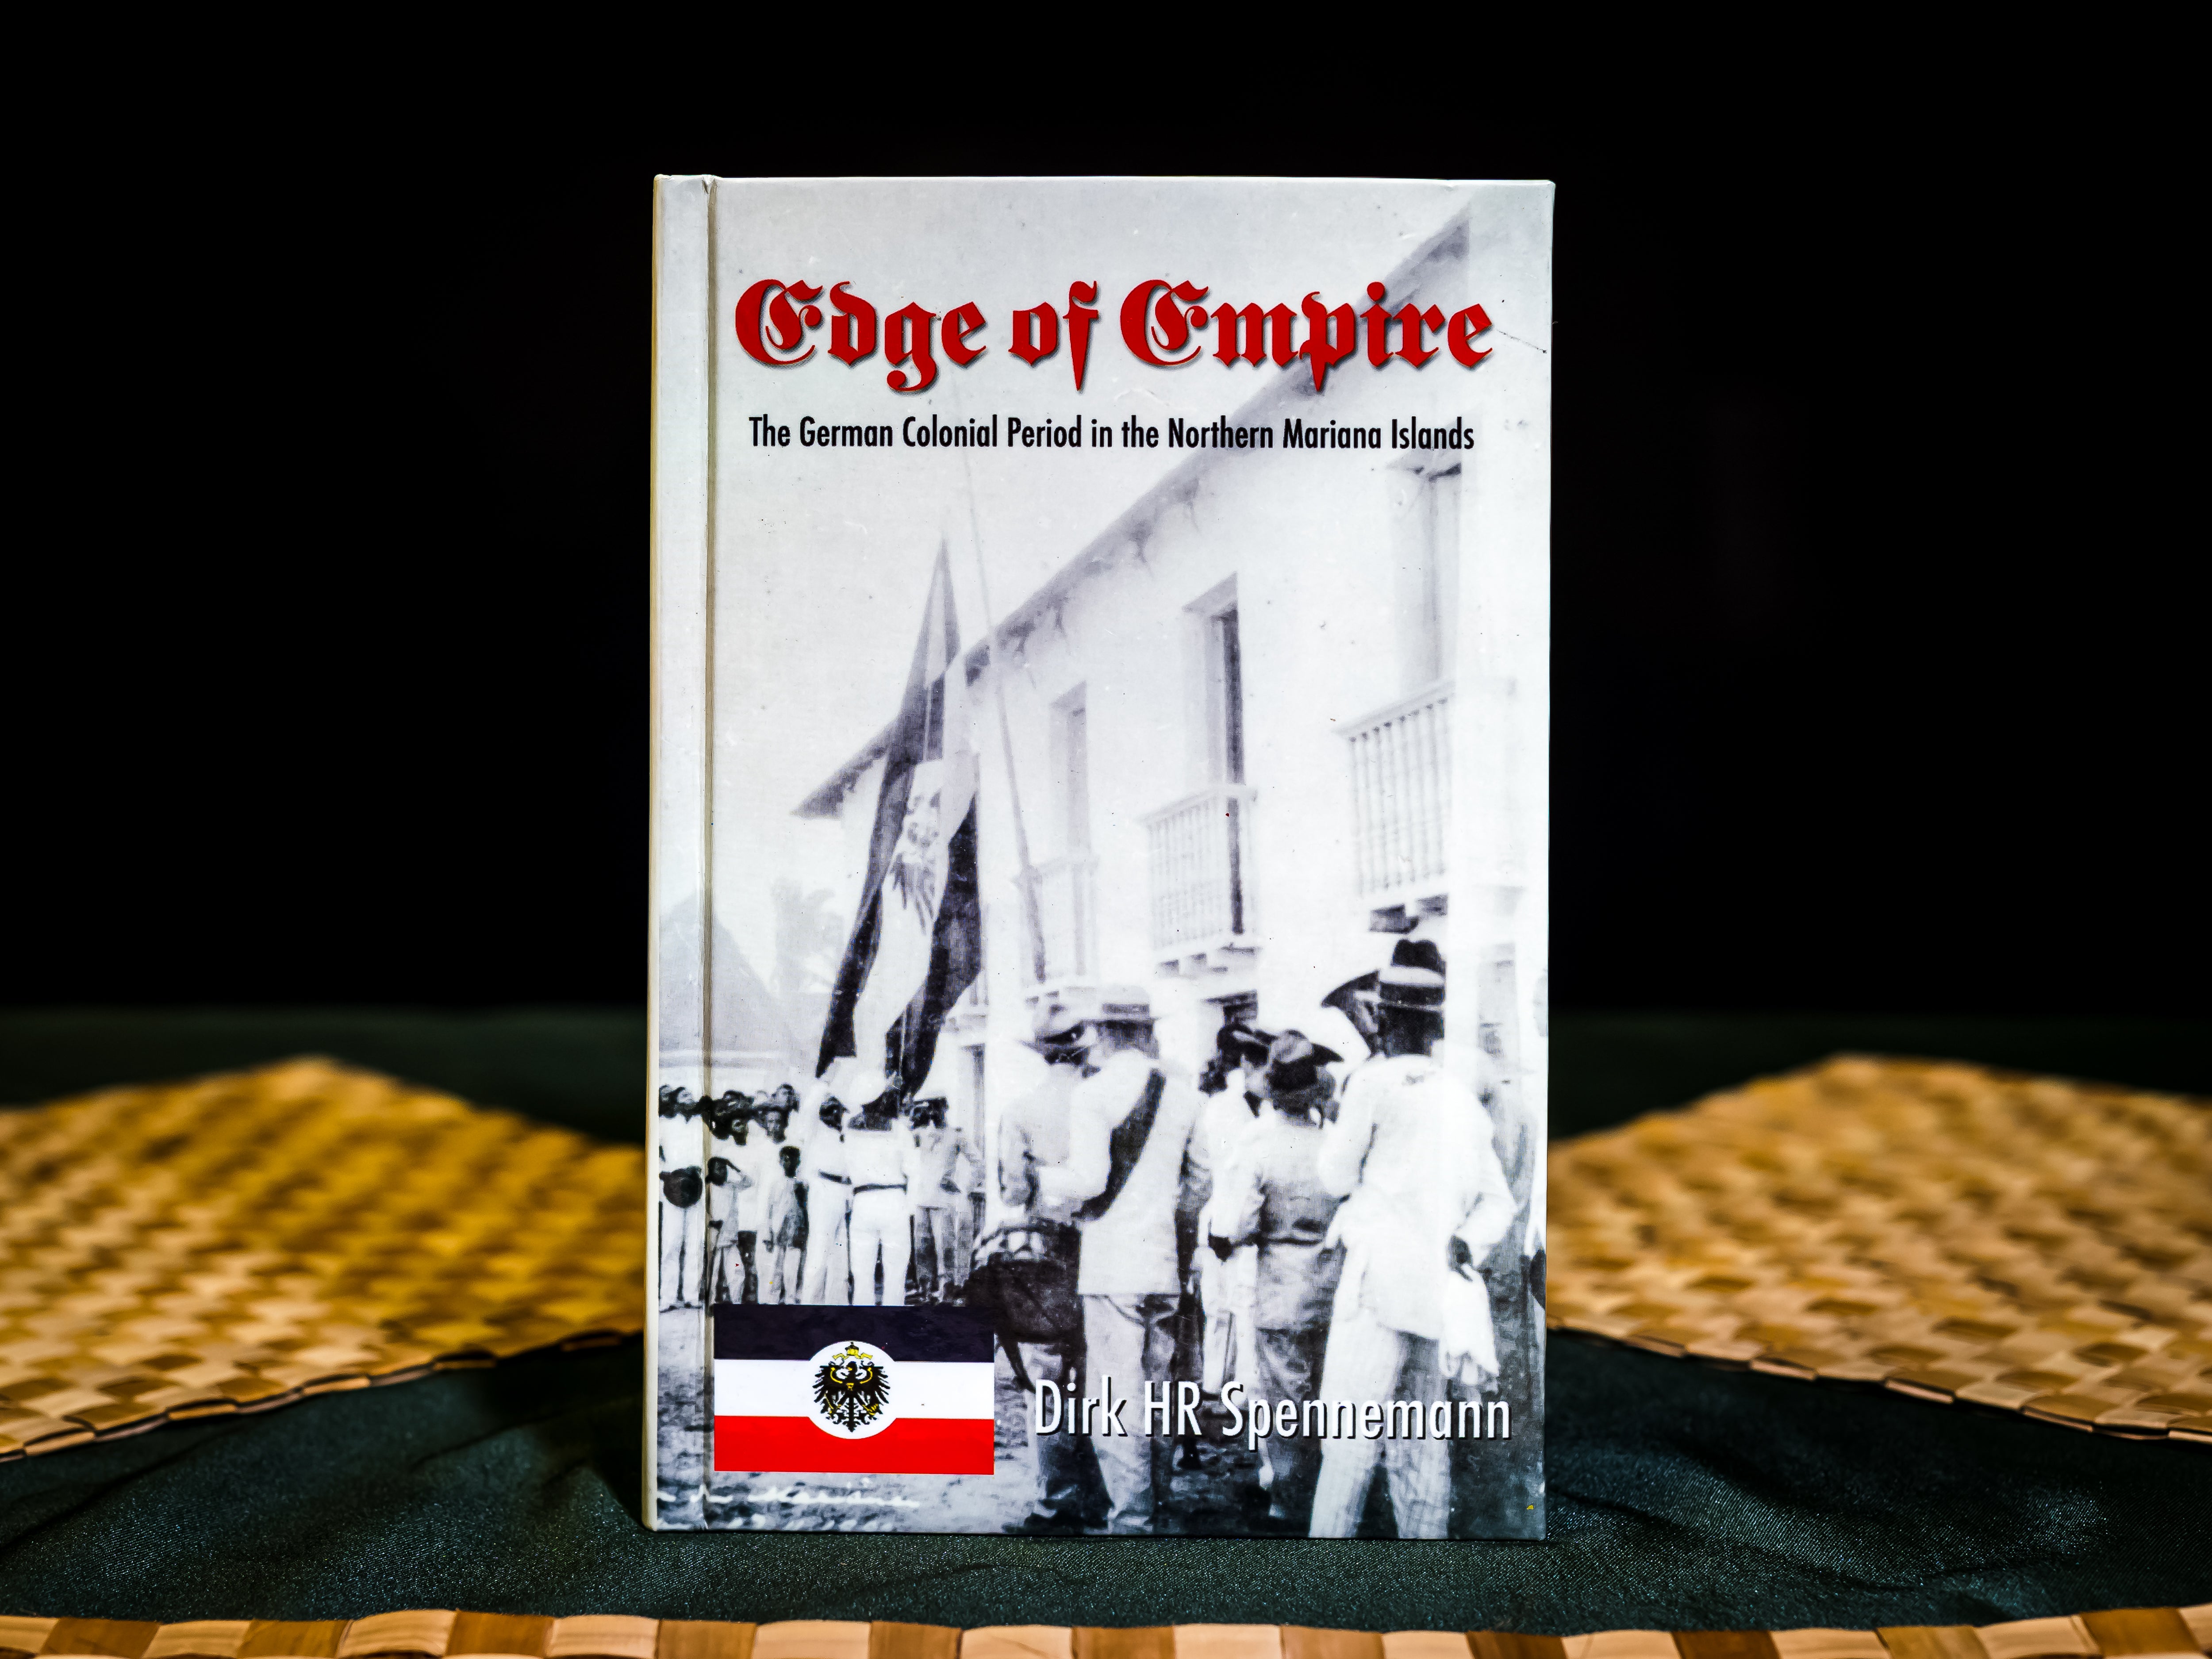 Edge of Empire: The German Colonial Period in the Northern Mariana Islands